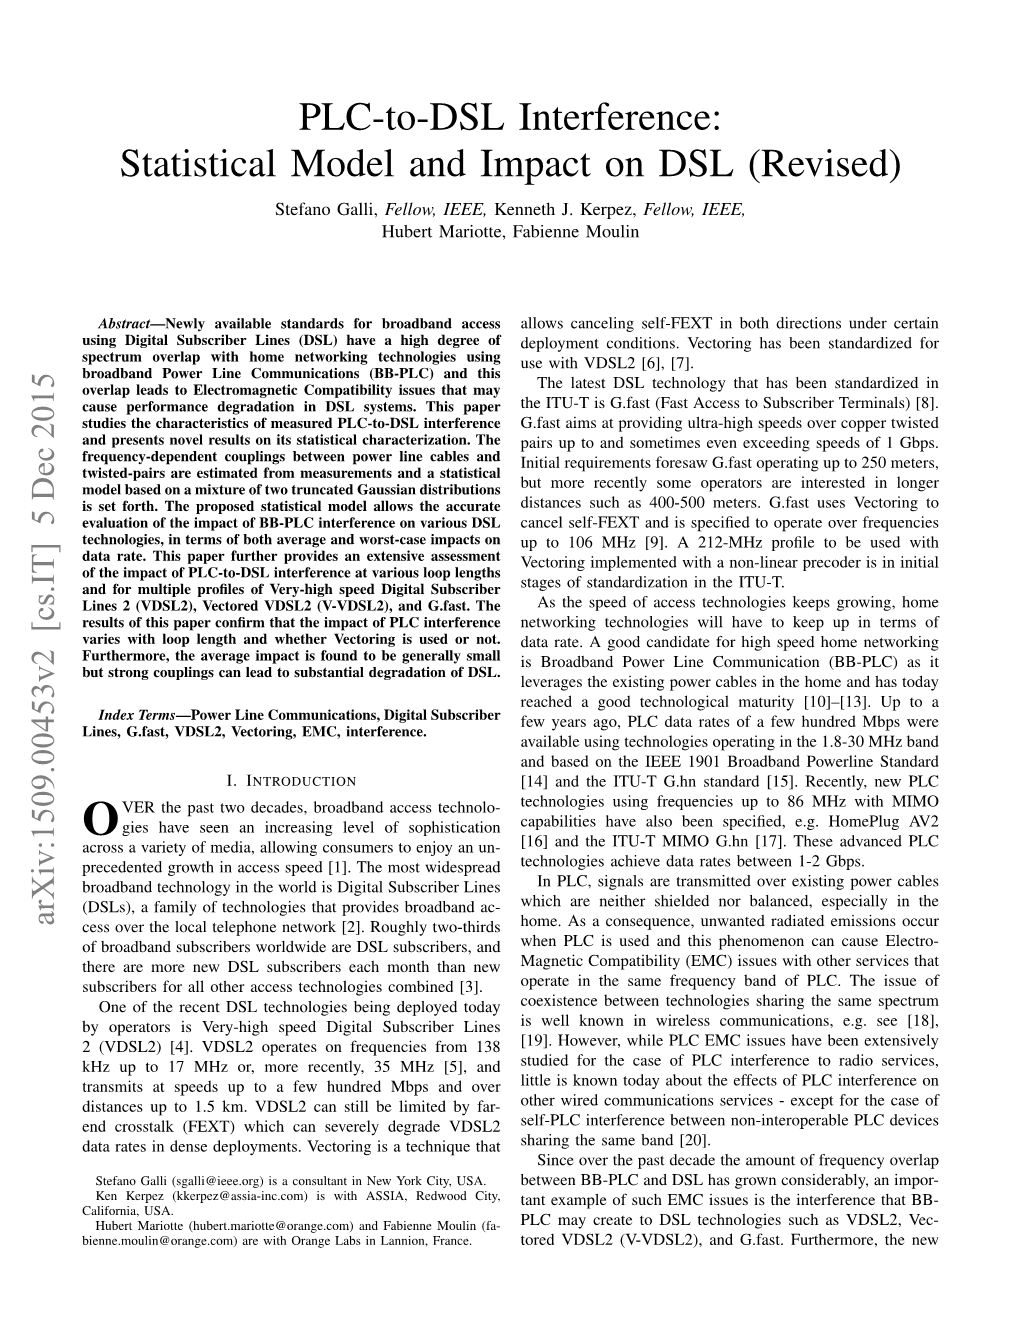 PLC-To-DSL Interference: Statistical Model and Impact on DSL (Revised) Stefano Galli, Fellow, IEEE, Kenneth J